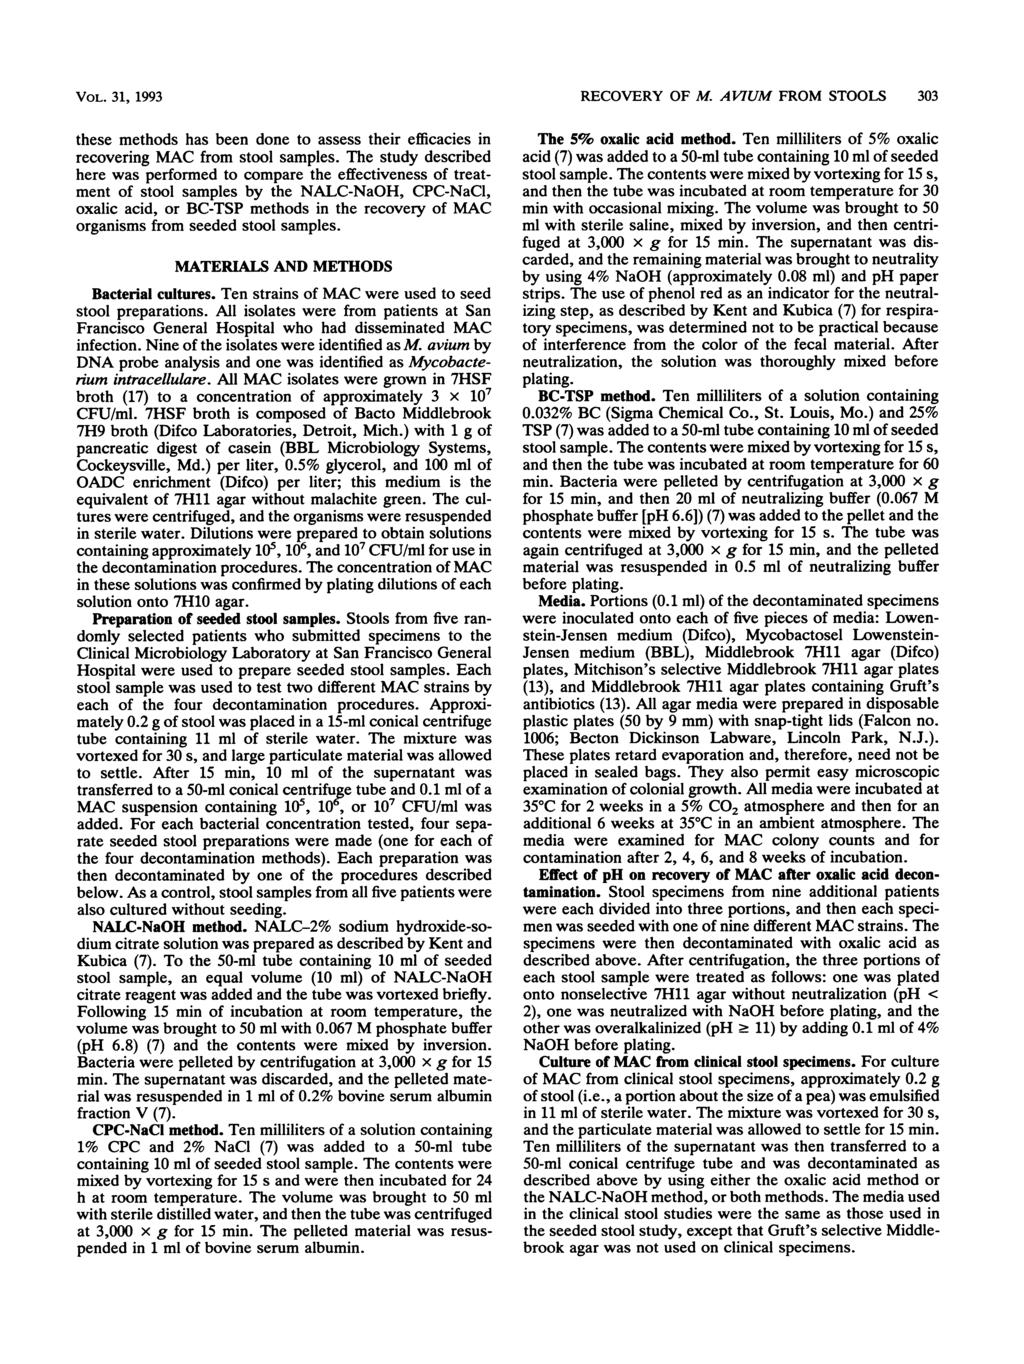 VOL. 31, 1993 these methods has been done to assess their efficacies in recovering MAC from stool samples.